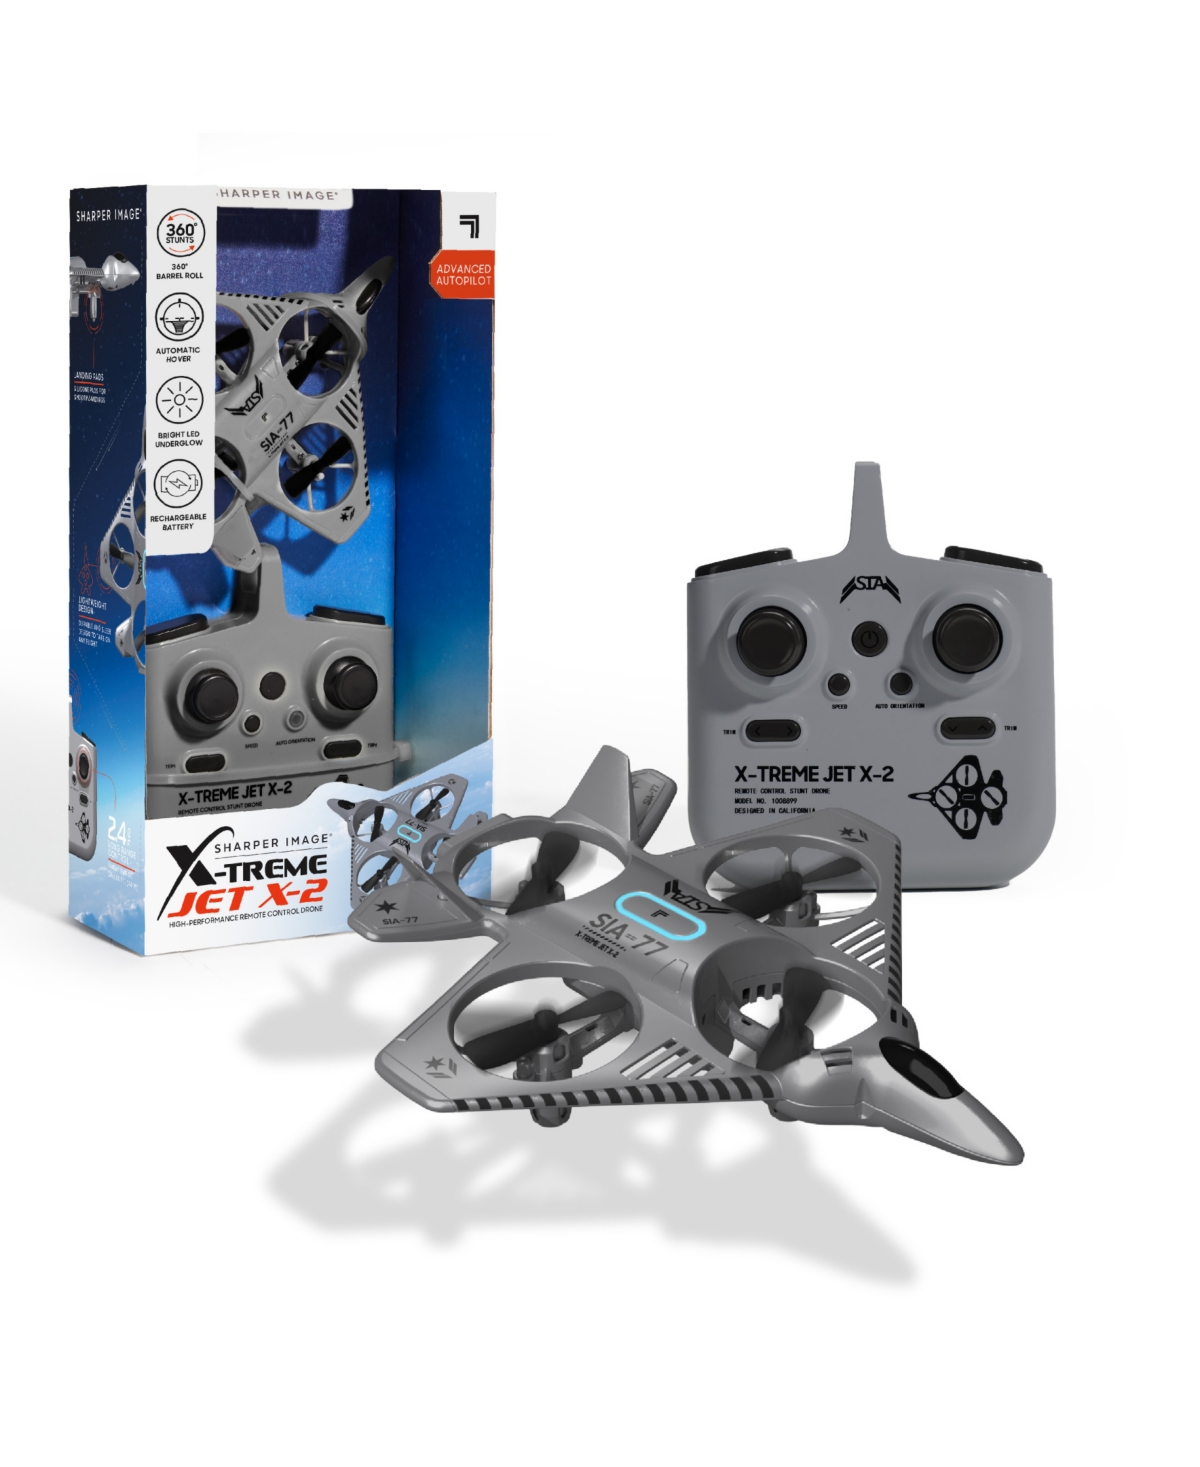 Sharper Image X-treme Jet X-2 High-performance Remote Control Drone In Gray